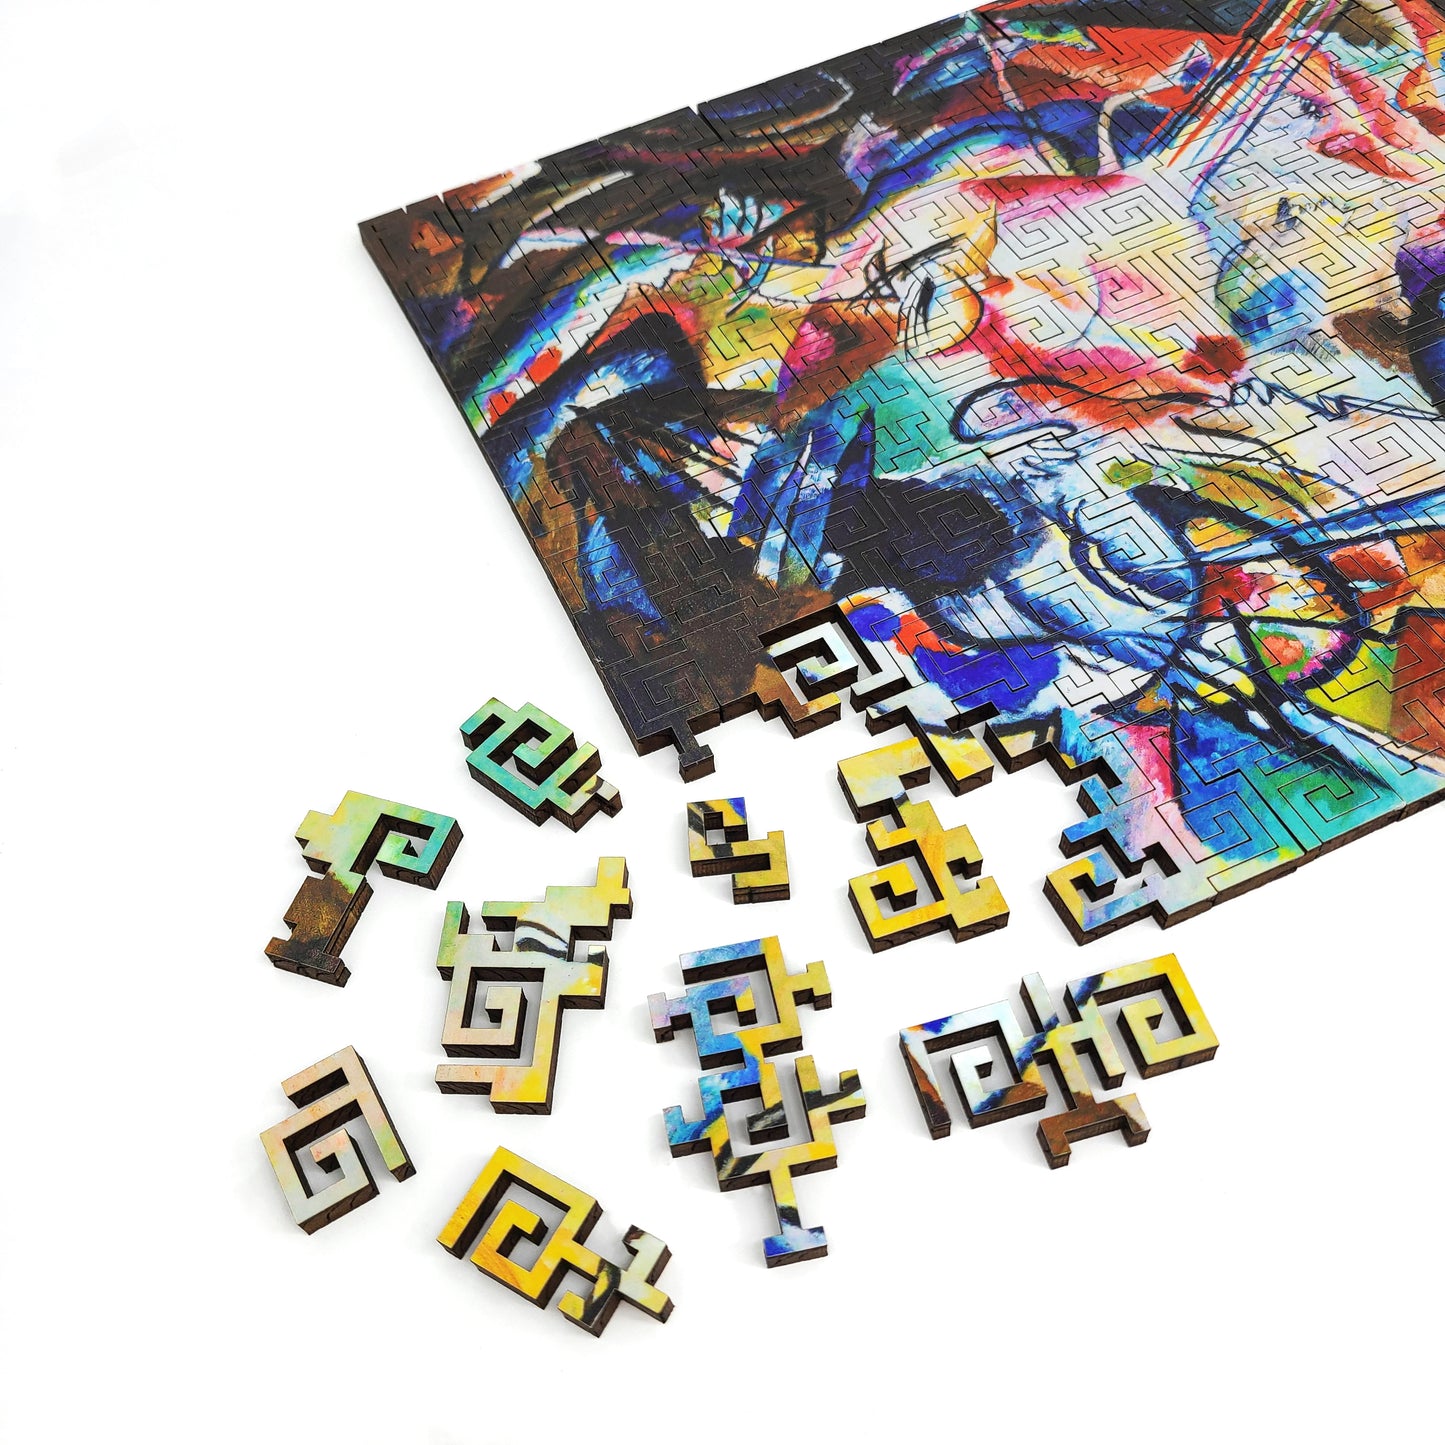 Wooden Jigsaw Puzzle with Uniquely Shaped Pieces for Adults - 300 Pieces - Challenge. Composition VI